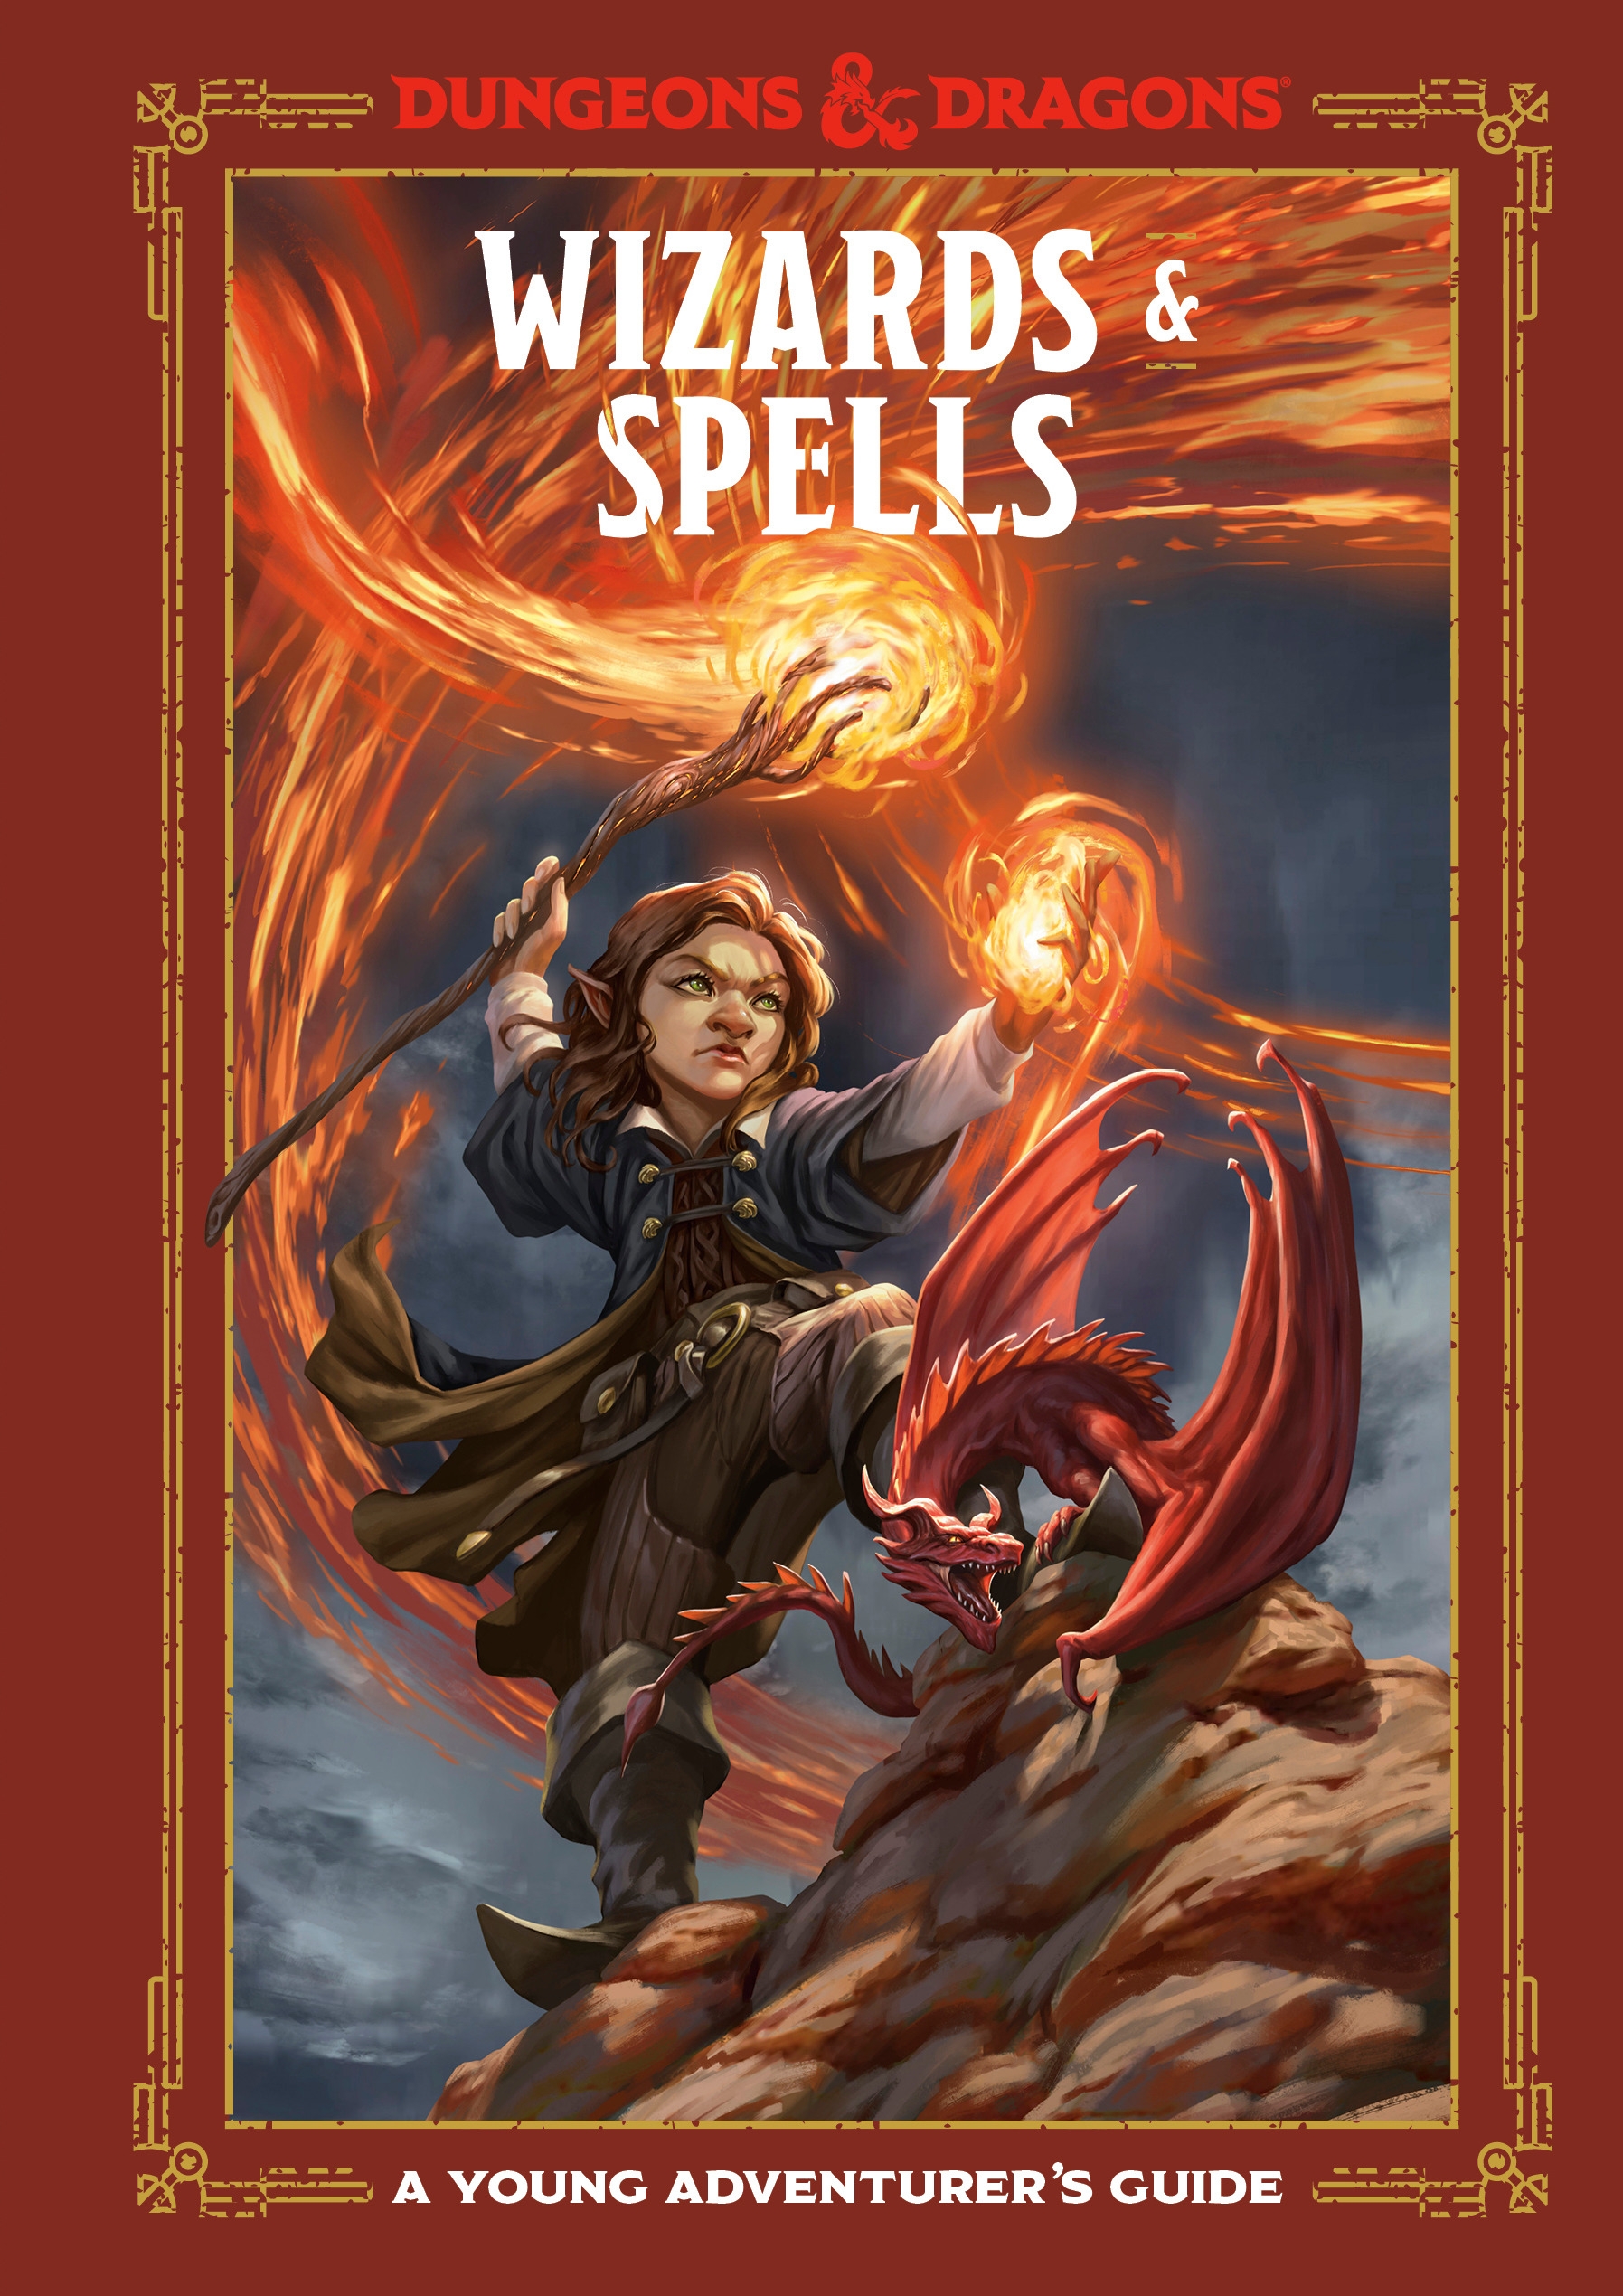 Wizards & Spells (Dungeons & Dragons) by Dungeons & Dragons, written by